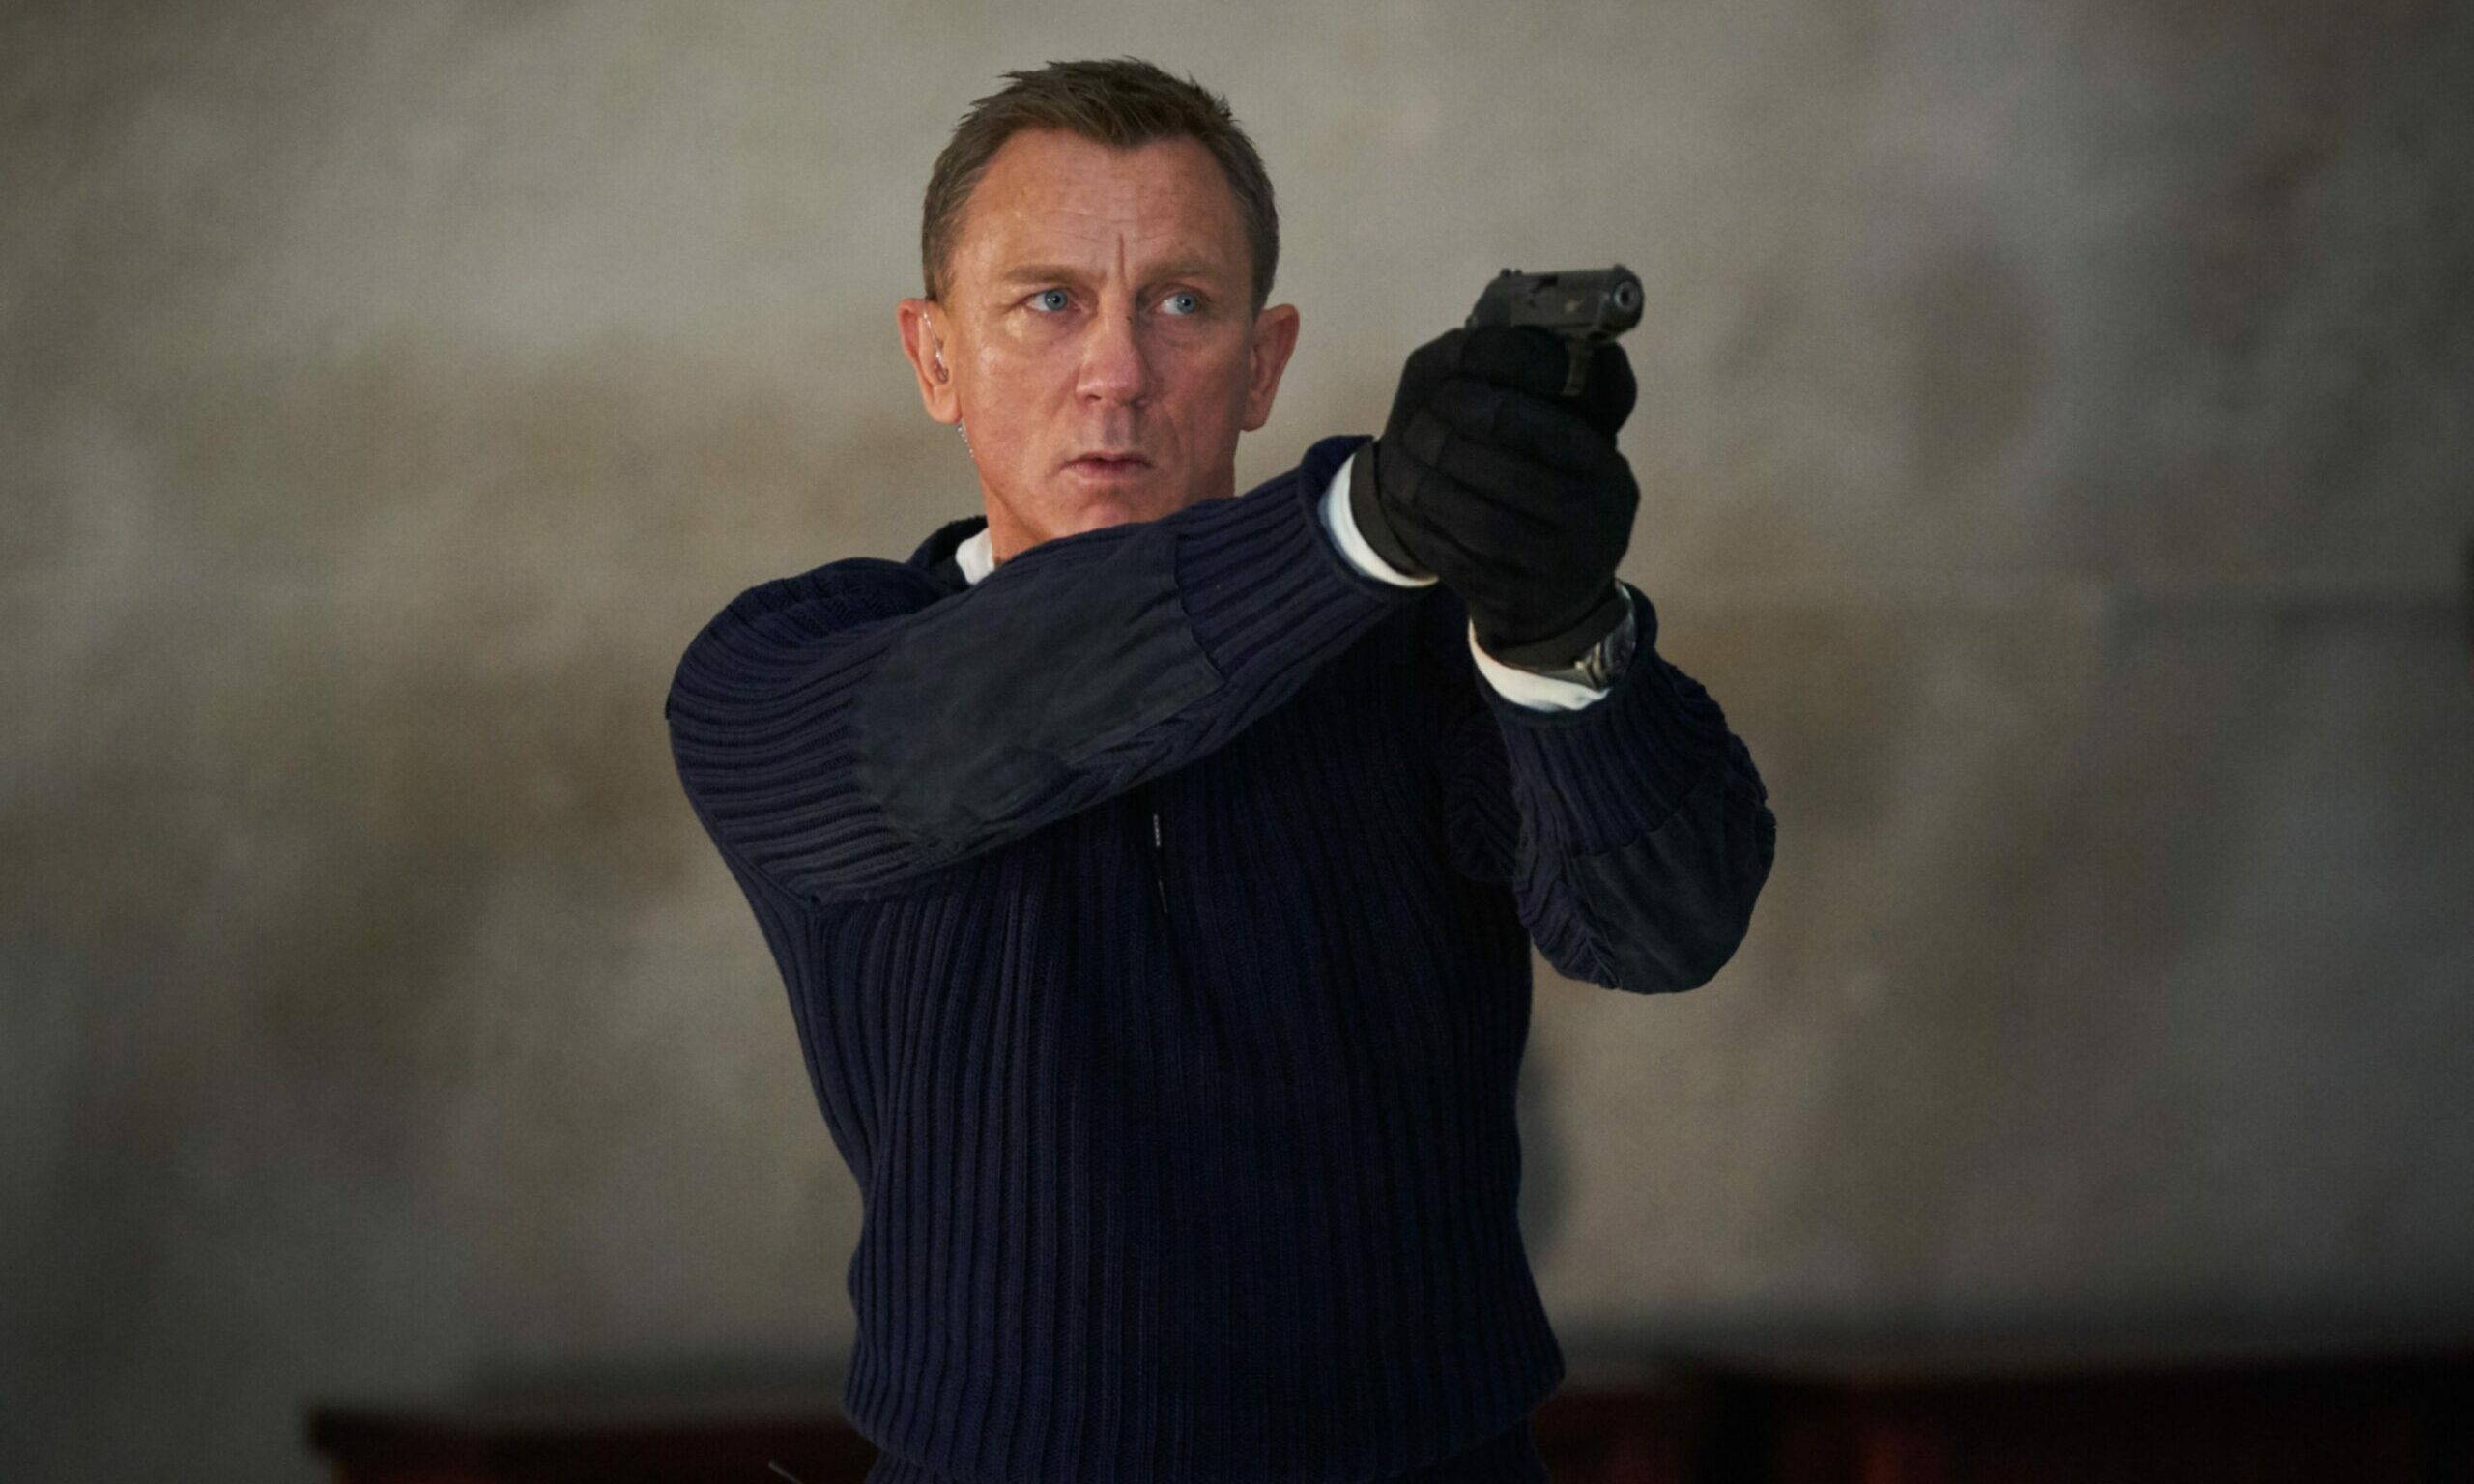 Daniel Craig in the new James Bond film - No Time To Die